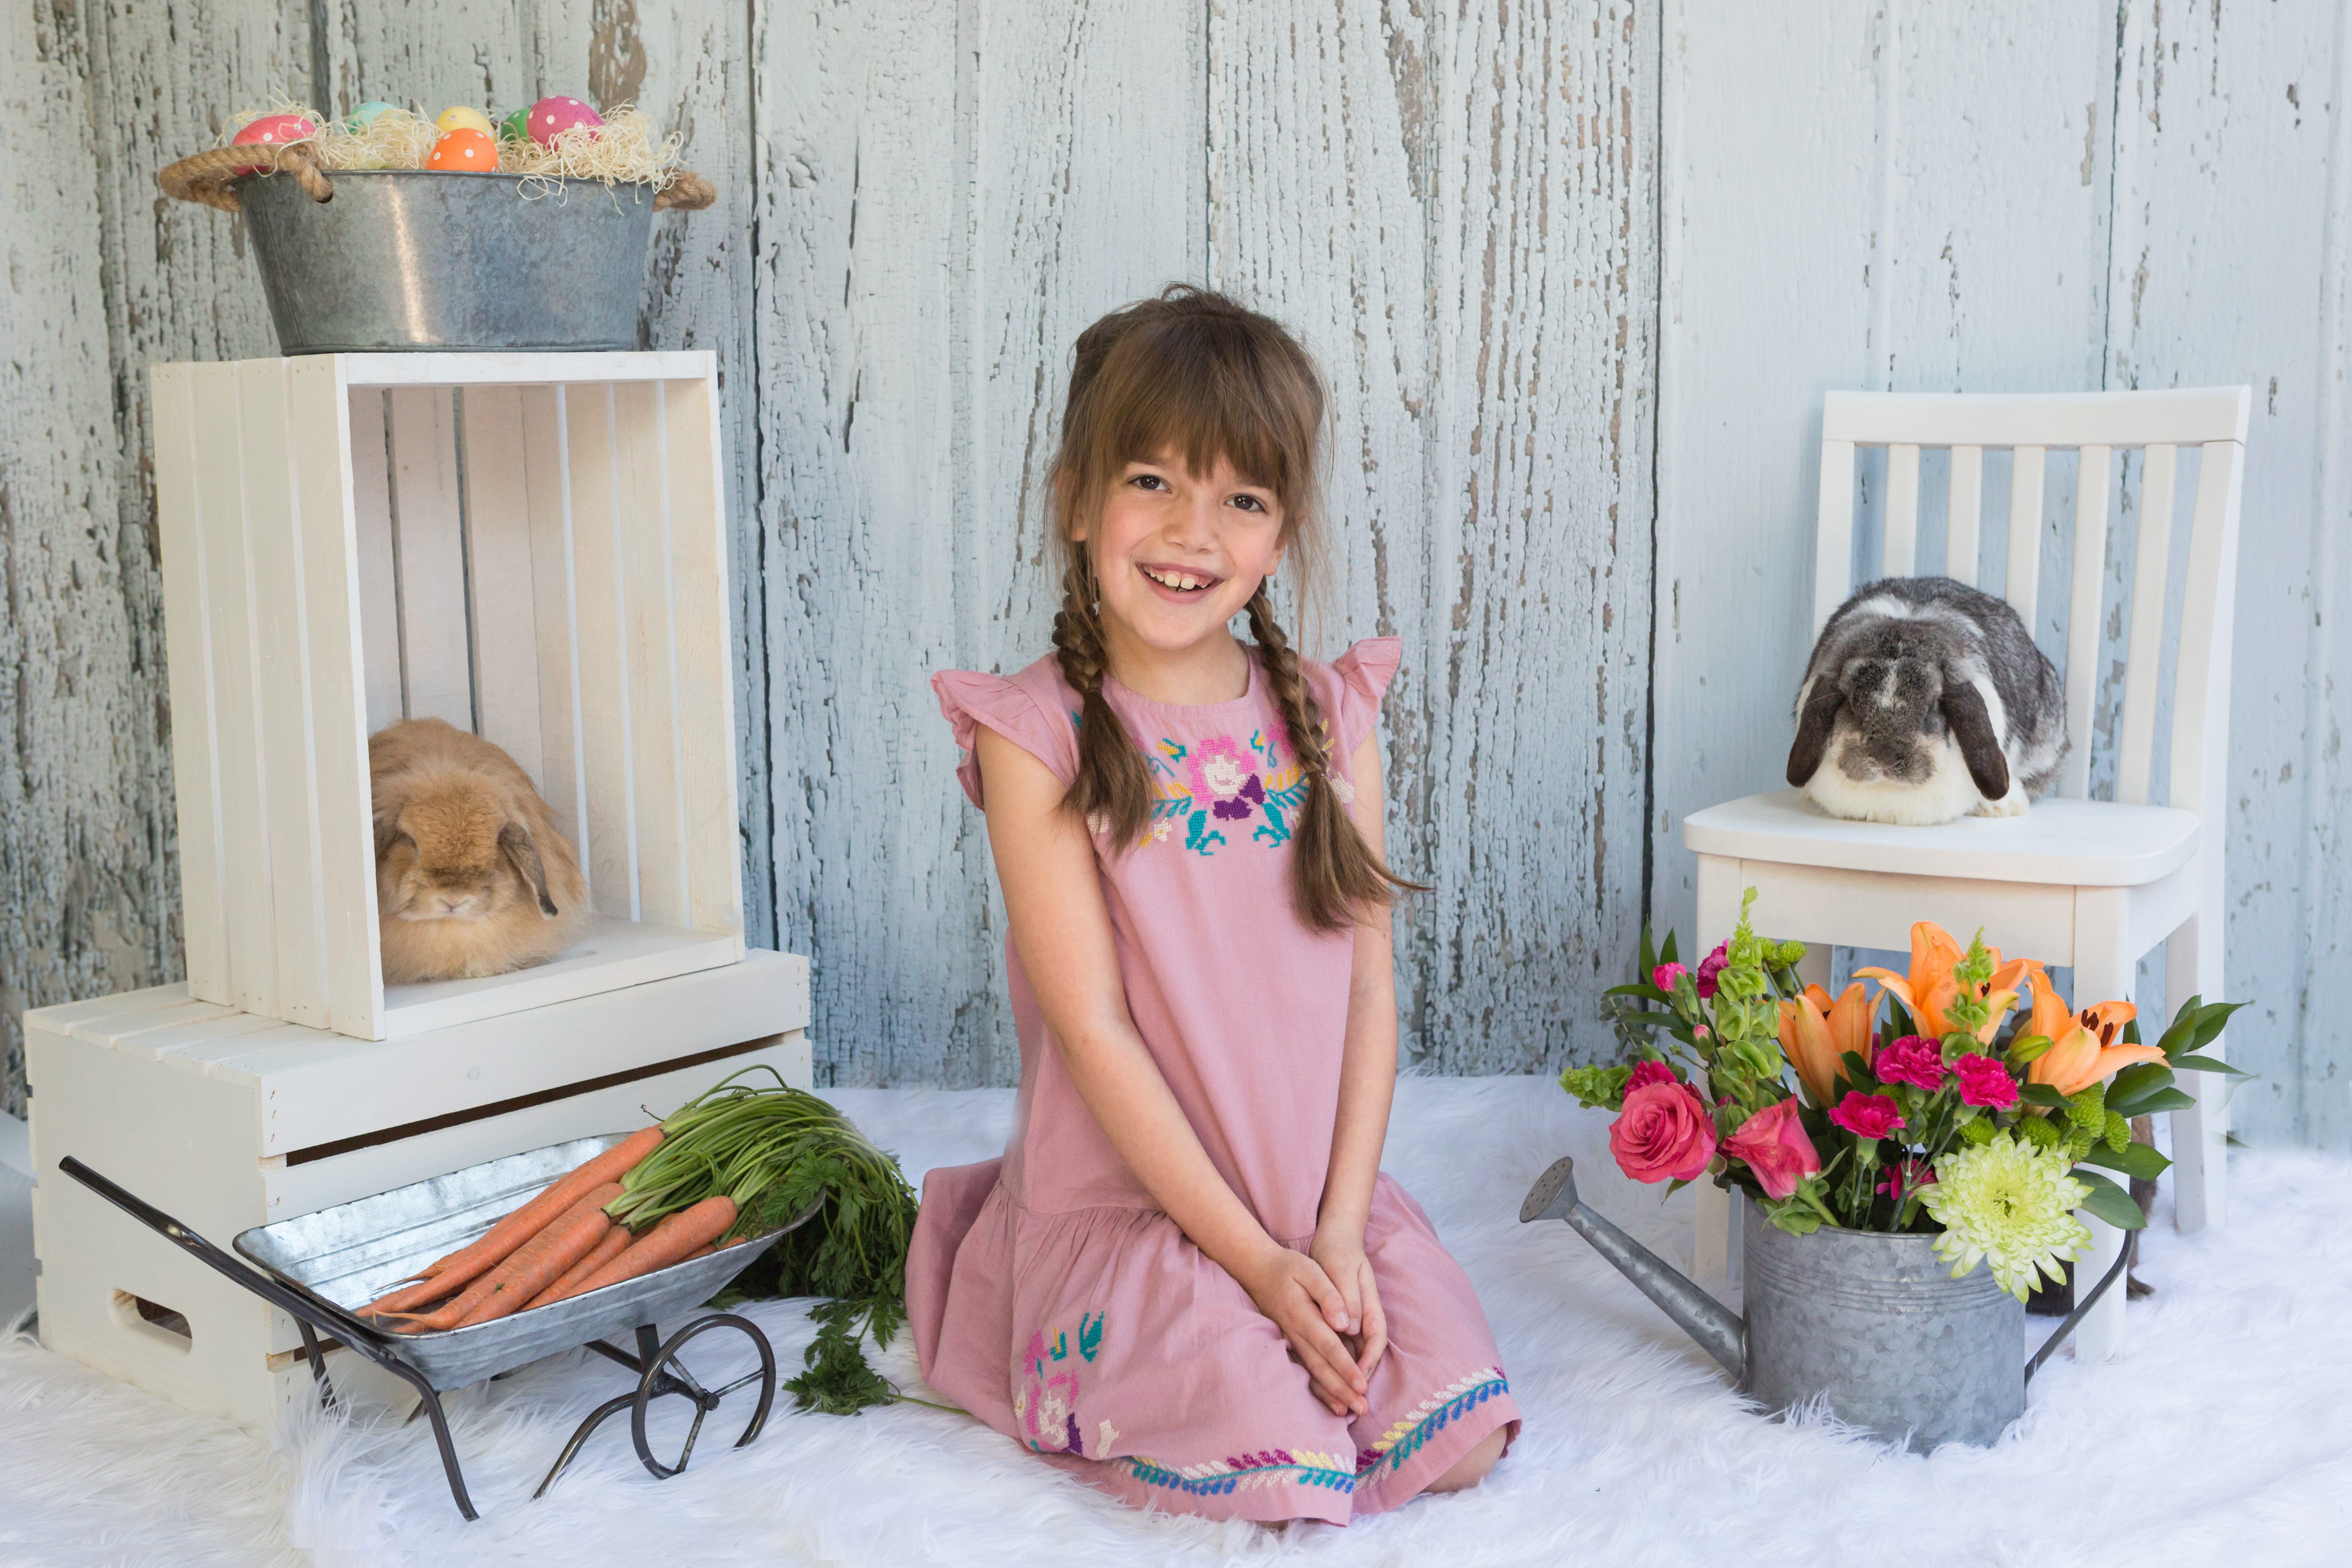 Easter Mini Sessions with Live Bunnies